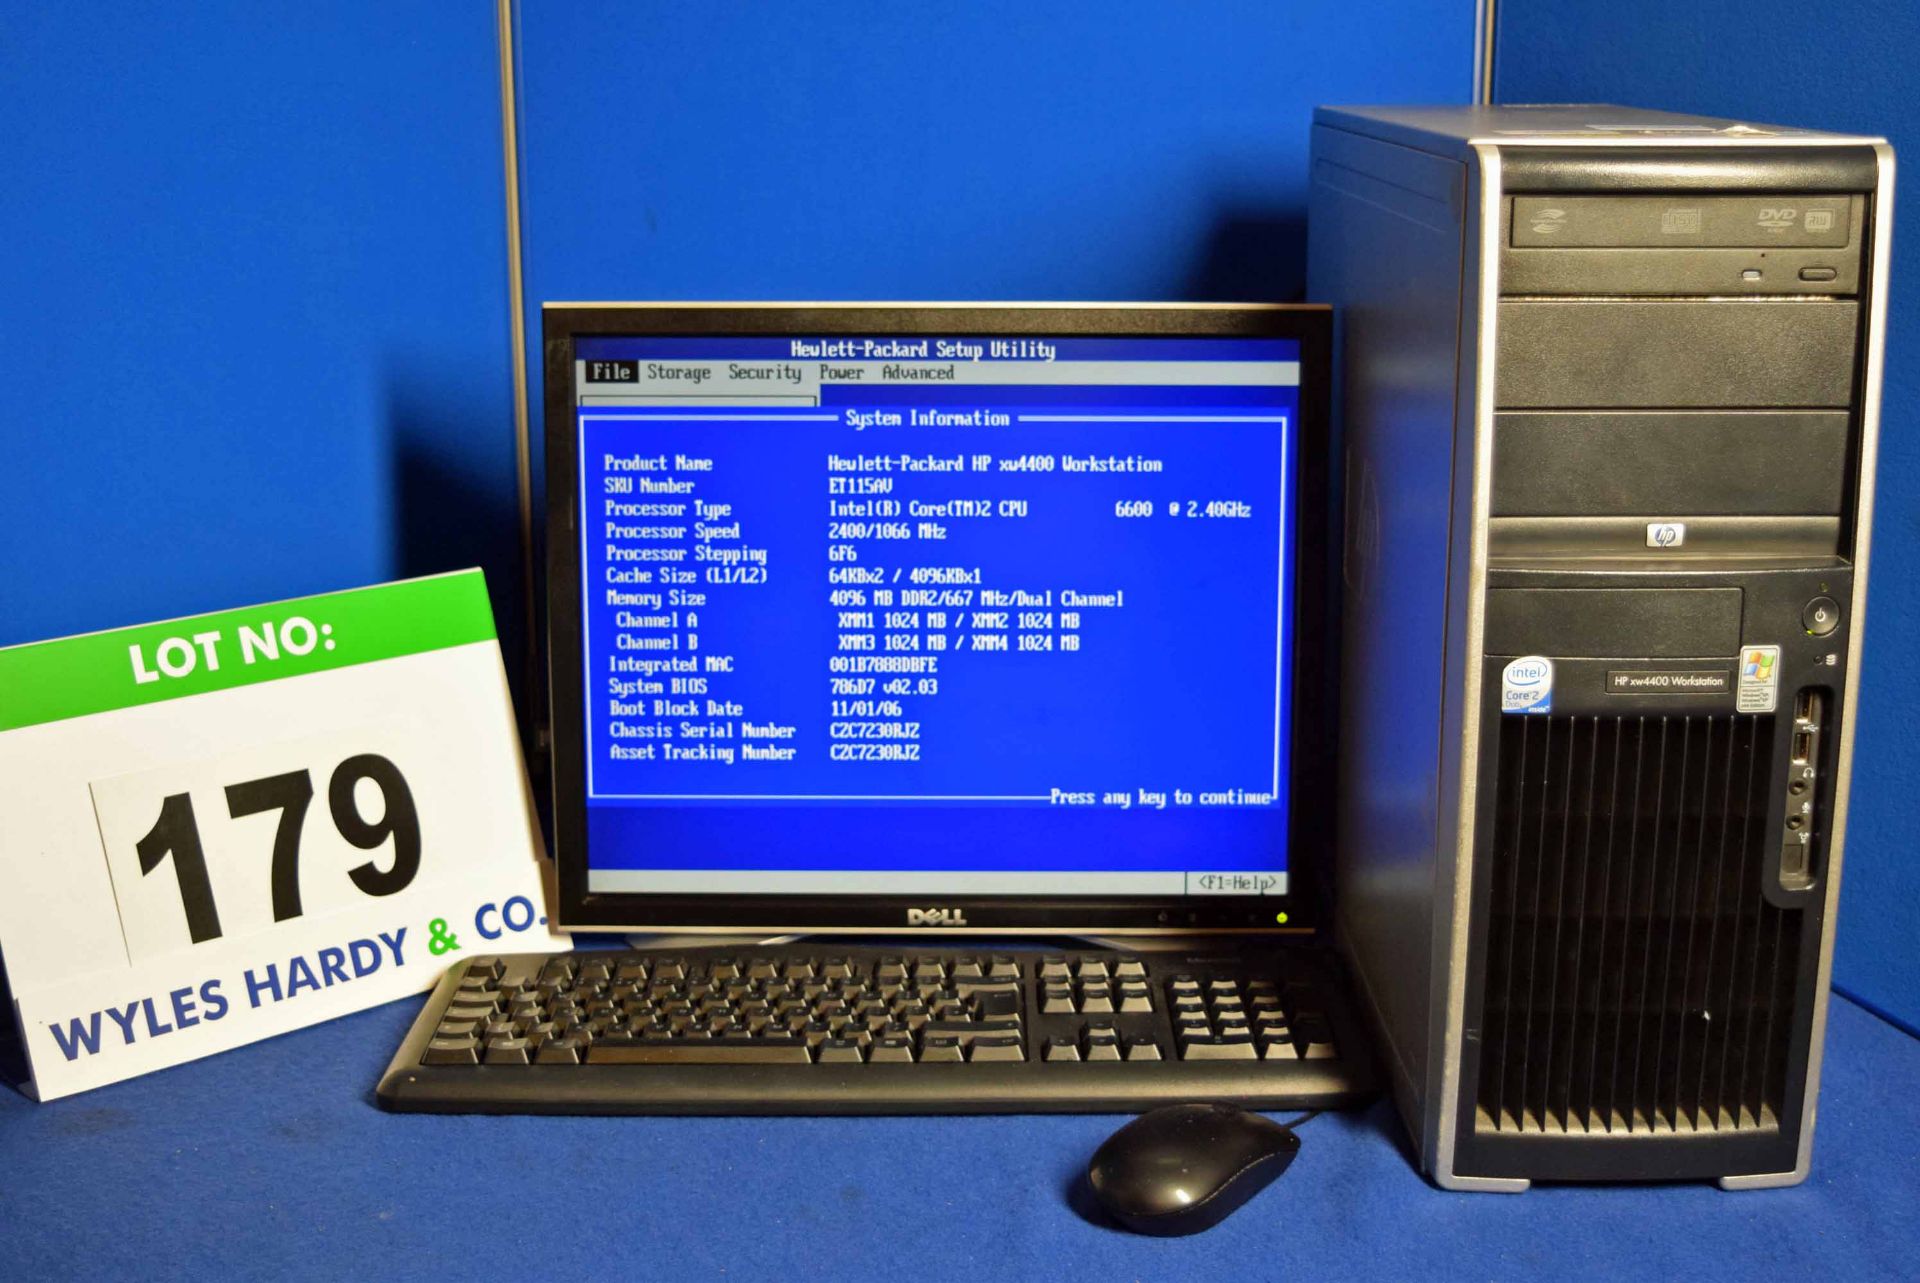 A HEWLETT PACKARD XW4400 Workstation INTEL Core 2 Duo 2.4Ghz Tower Personal Computer with Twin 160GB